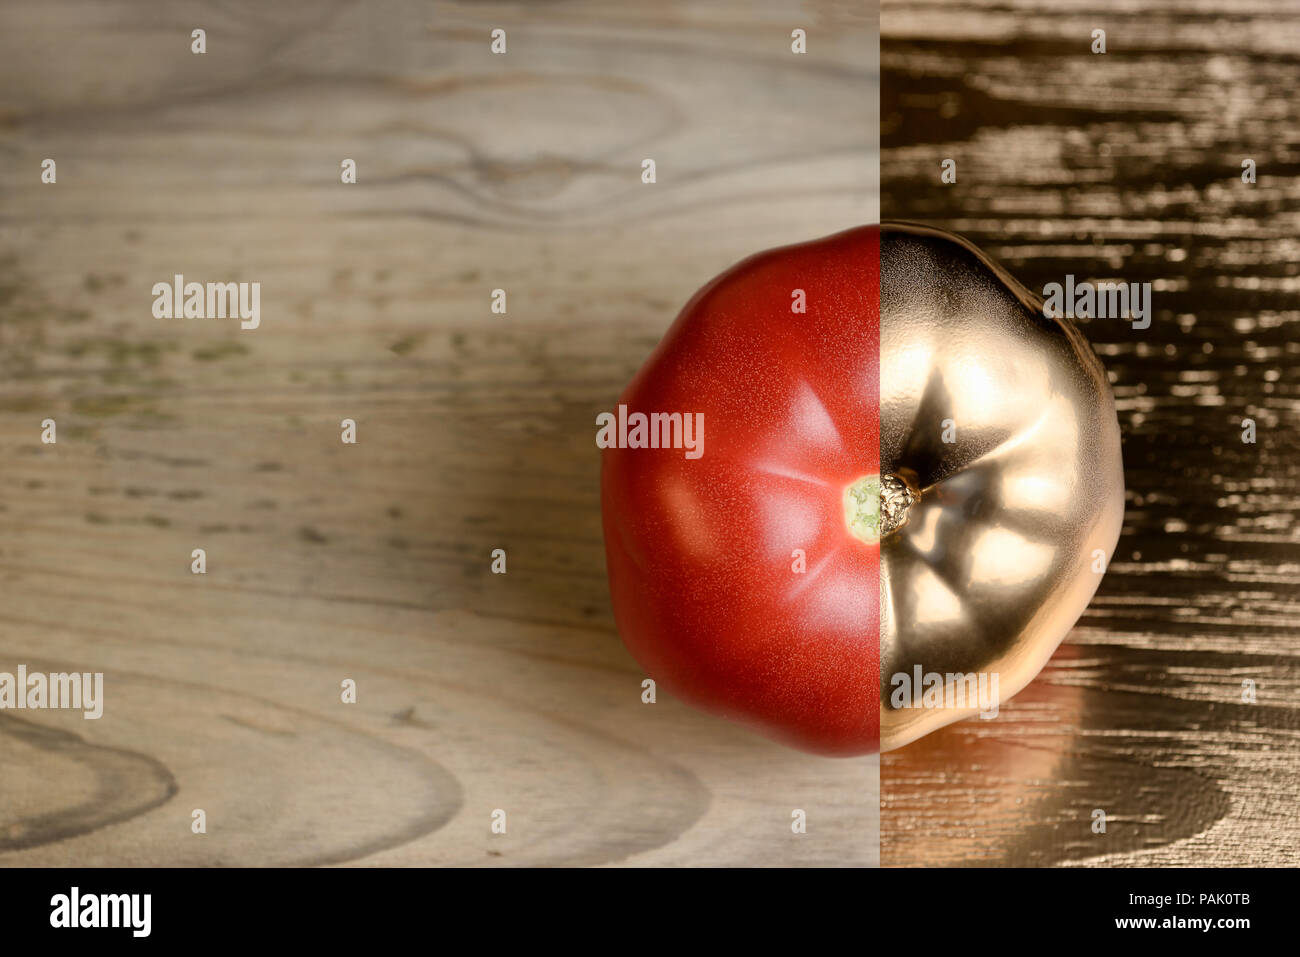 tomato on a wooden table with gold paint Stock Photo